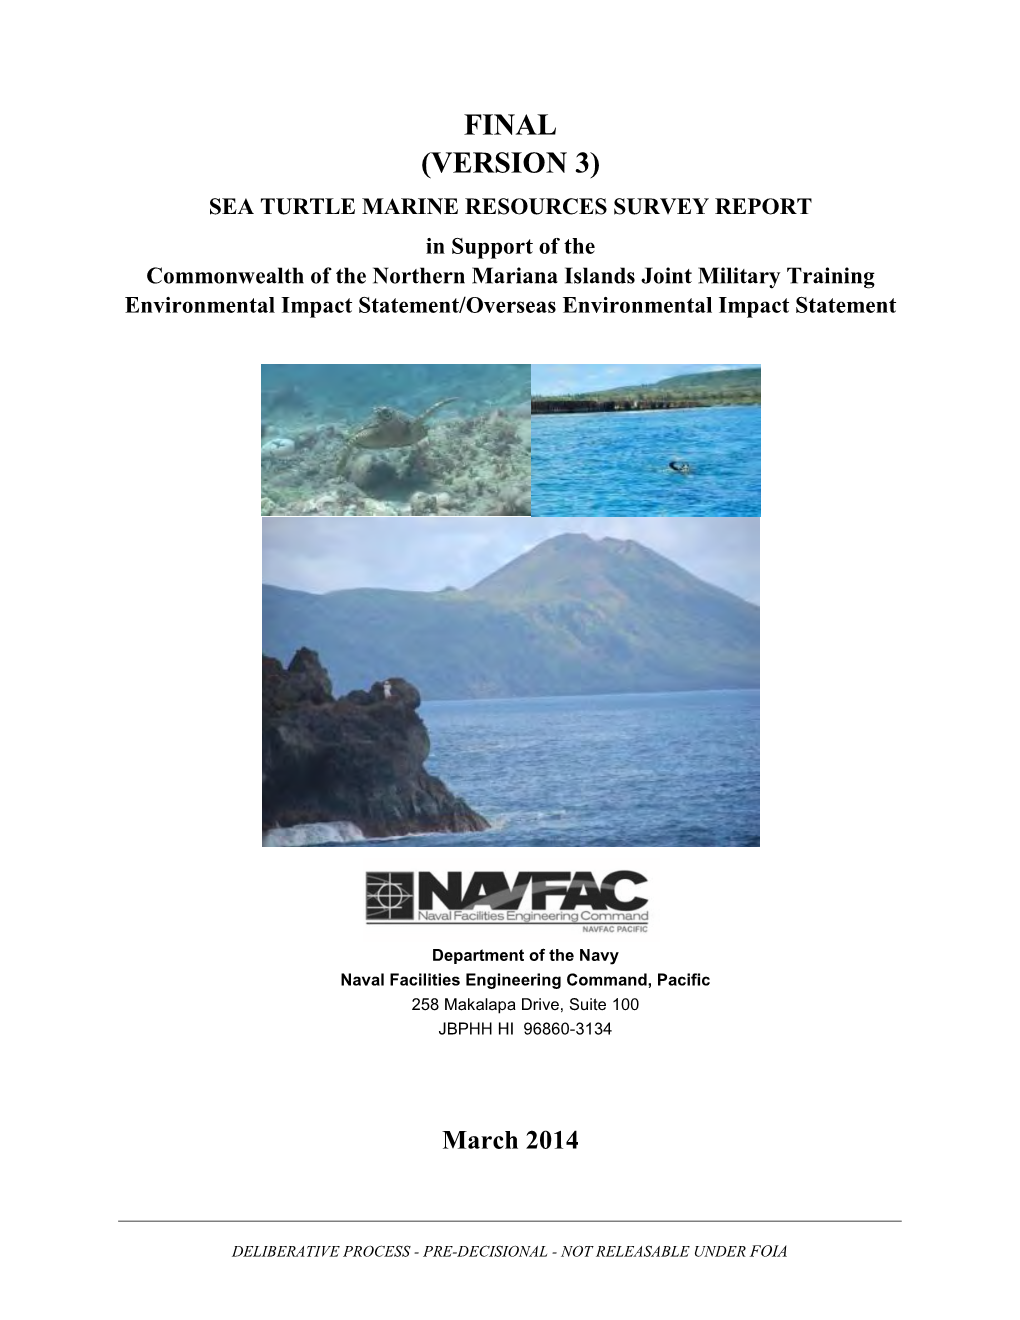 Commonwealth of the Northern Mariana Islands Joint Military Training Environmental Impact Statement/Overseas Environmental Impact Statement